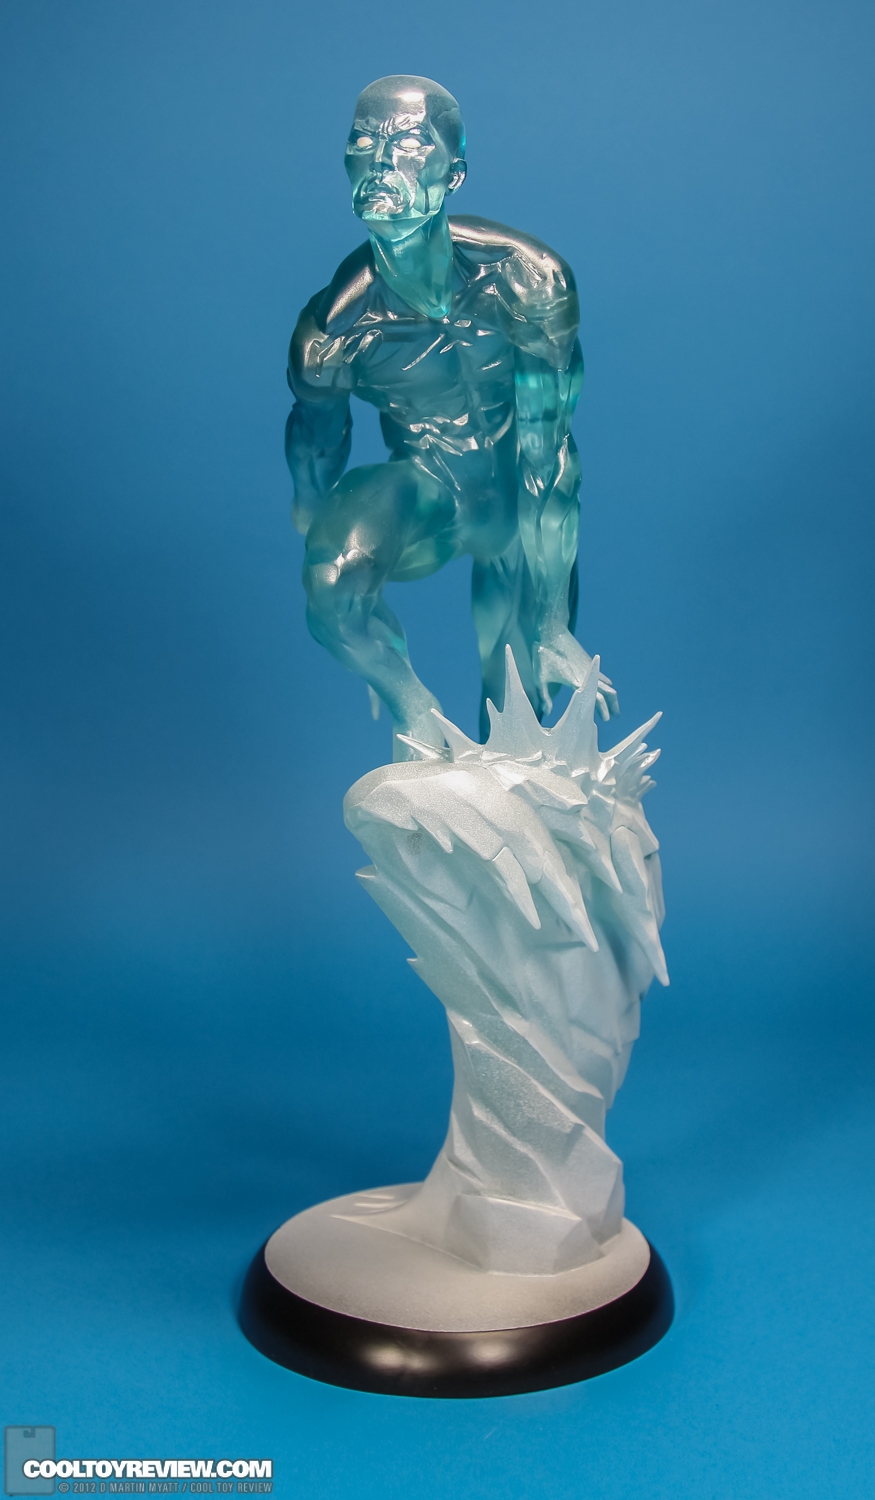 Iceman_Comiquette_Sideshow_Collectibles-01.jpg